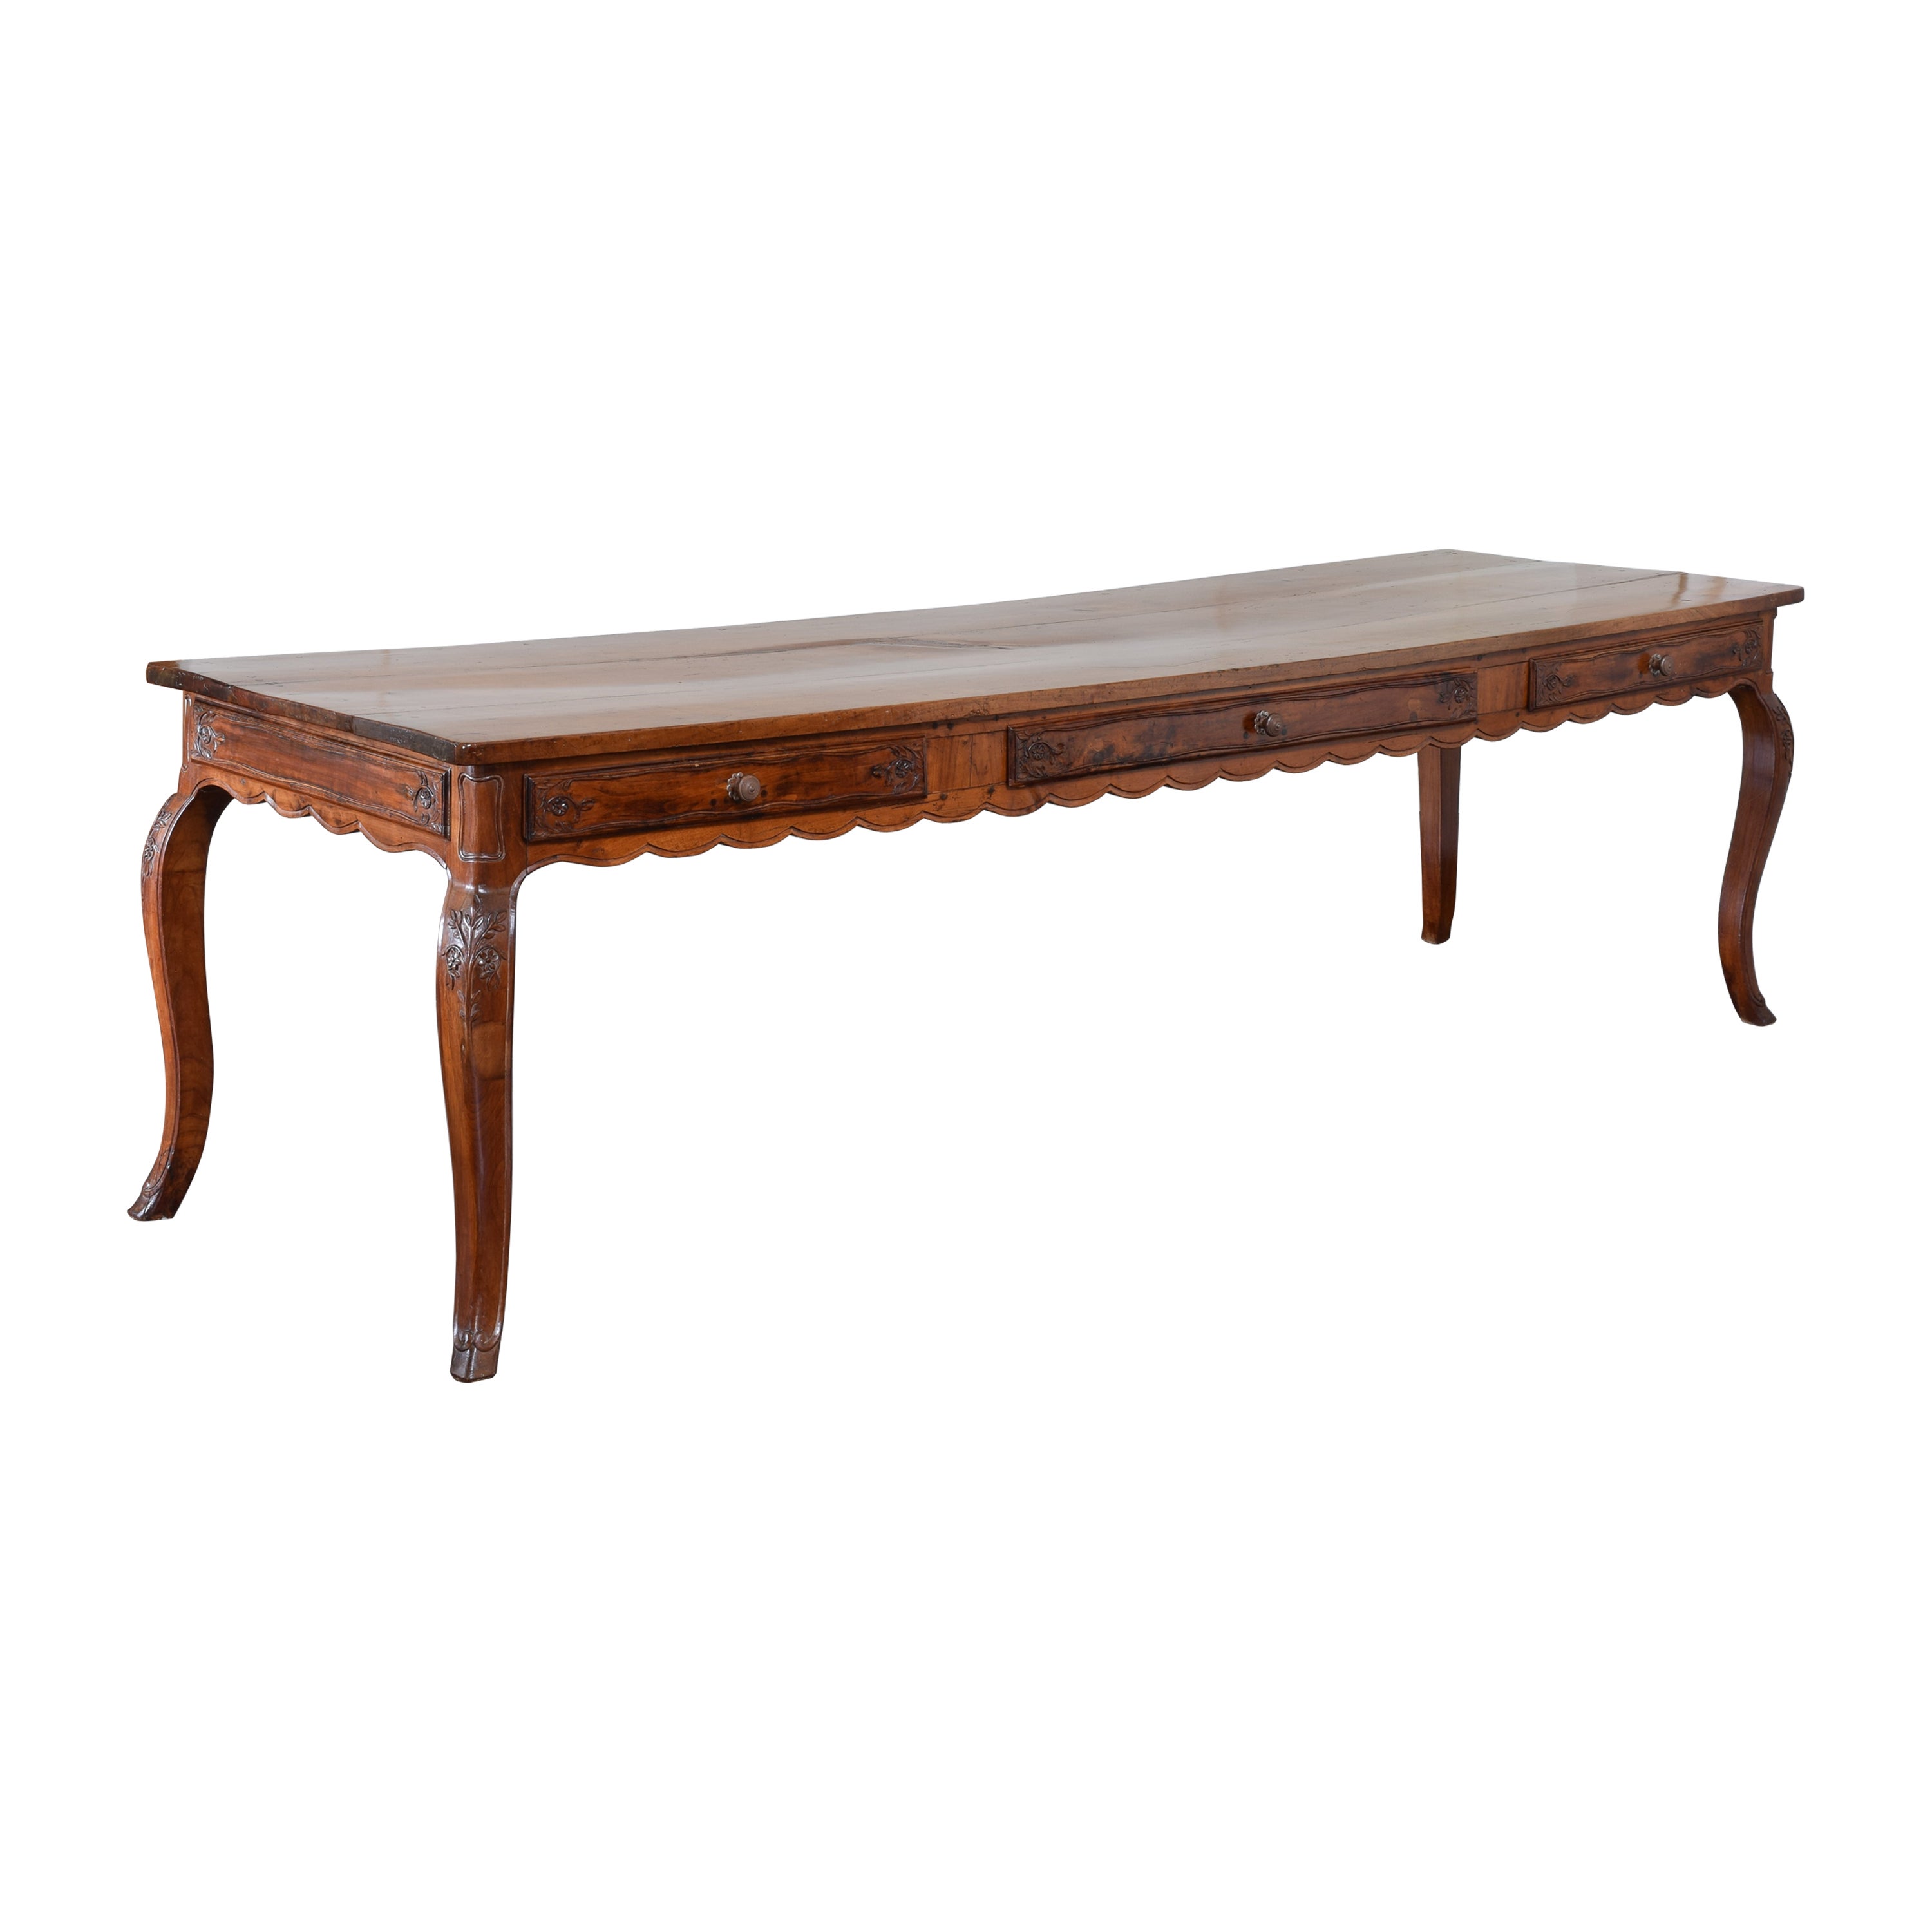 French, Louis XV Period, Carved Walnut 3-Drawer Kitchen/Center Table, mid 18thc For Sale